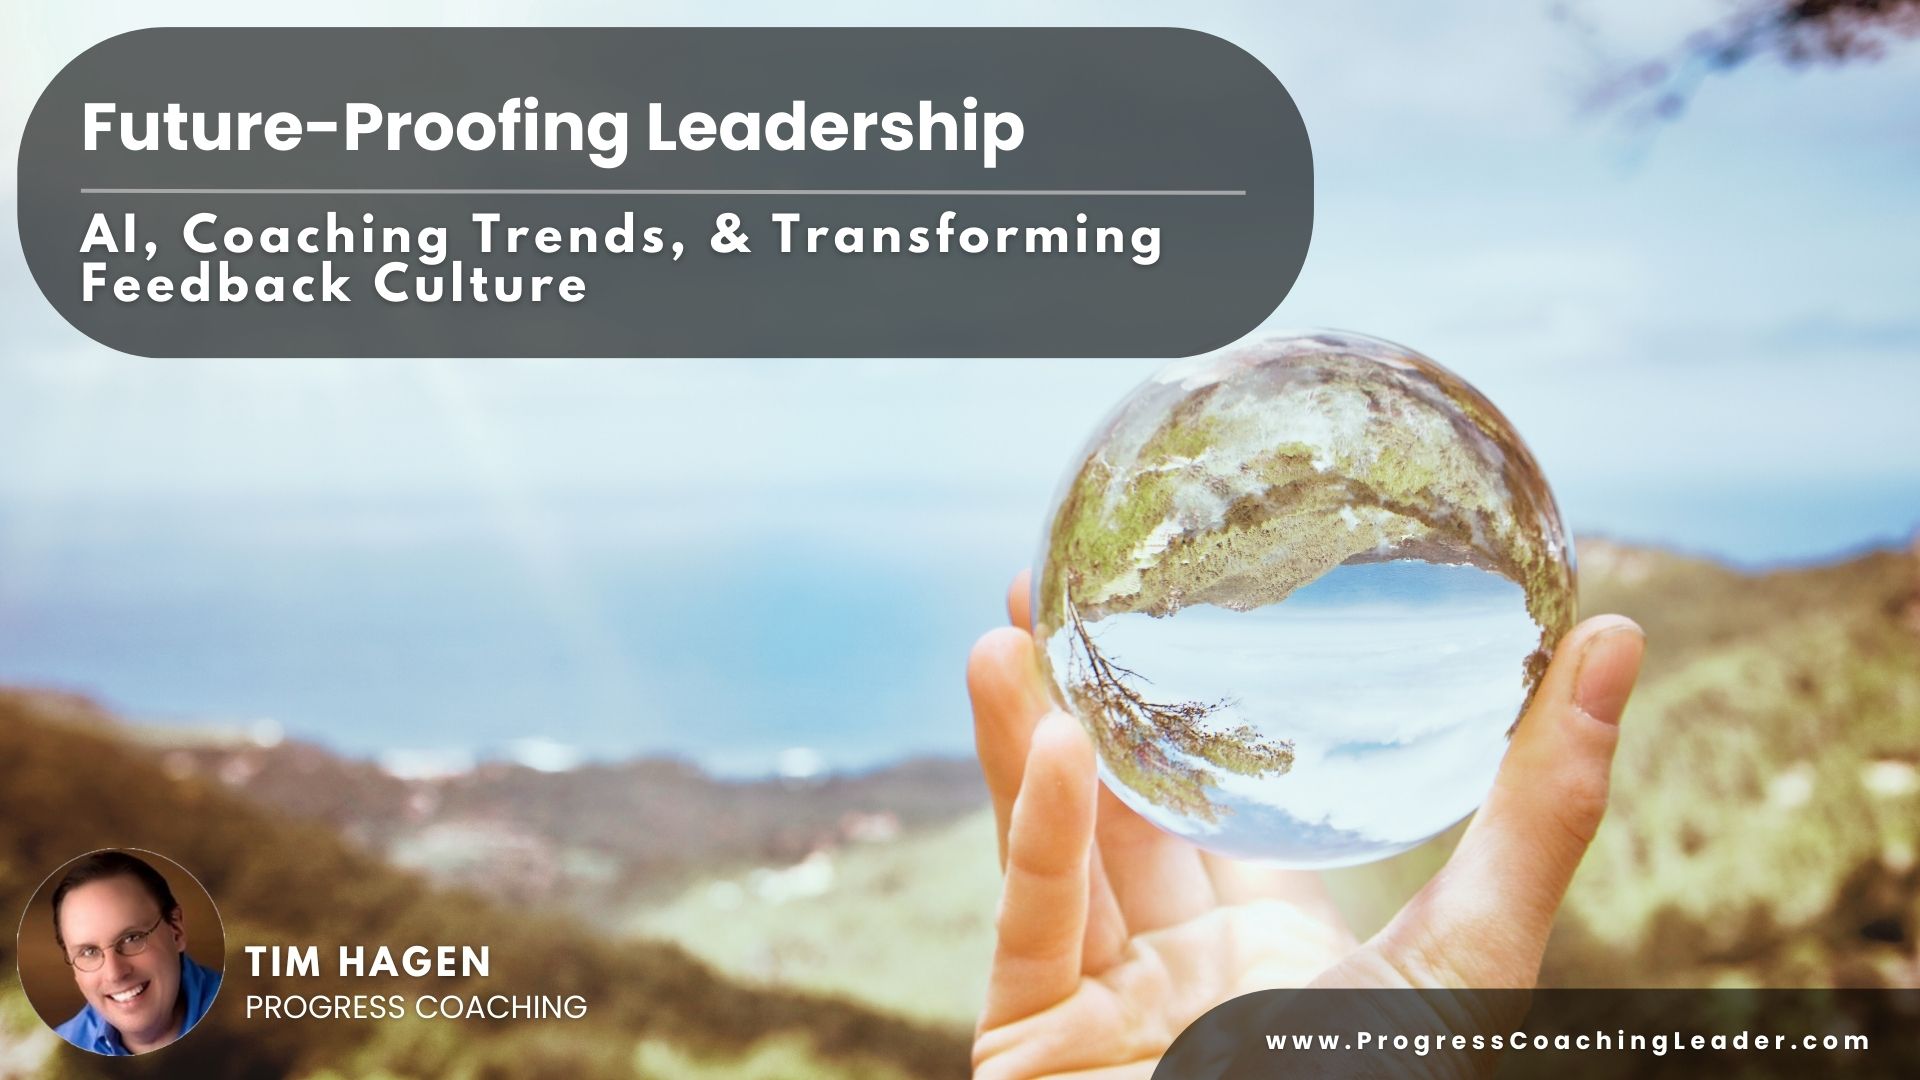 Future-Proofing Leadership: AI, Coaching Trends, & Transforming Feedback Culture